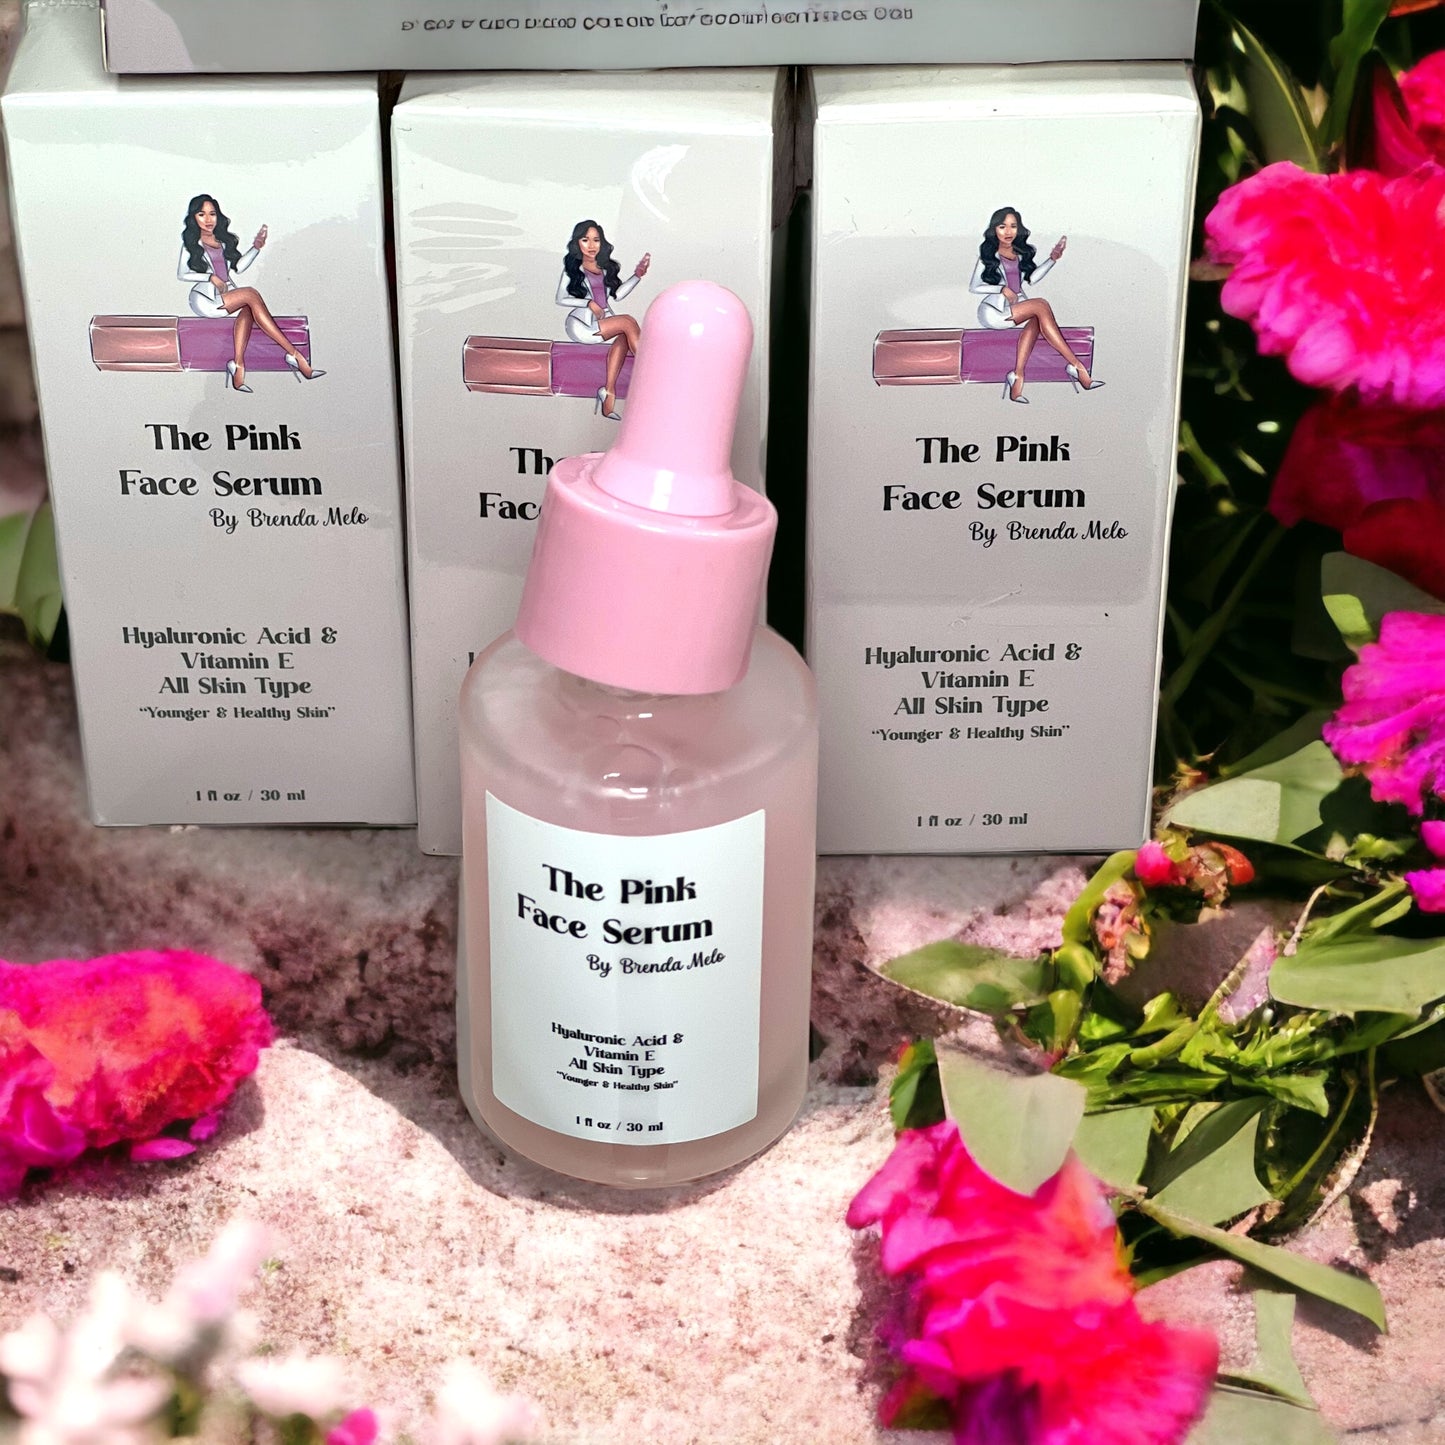 The Pink Face Serum